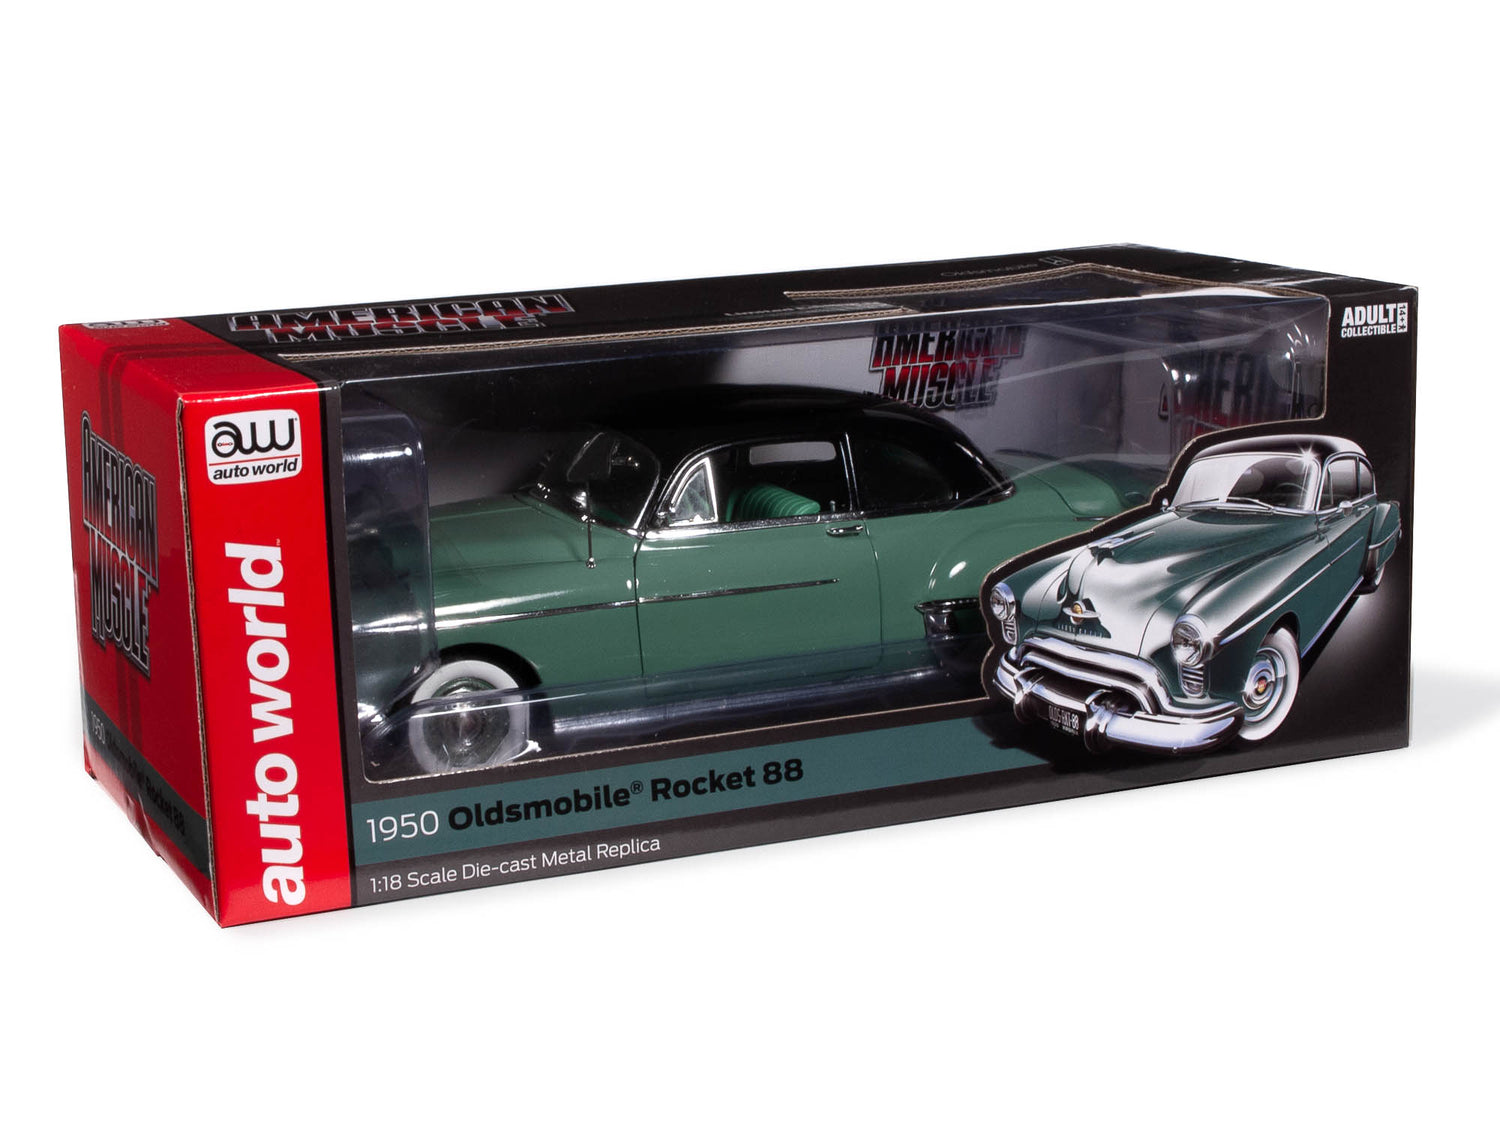 Boxed 1950s American Muscle olds 88 rocket 1:18 scale diecast